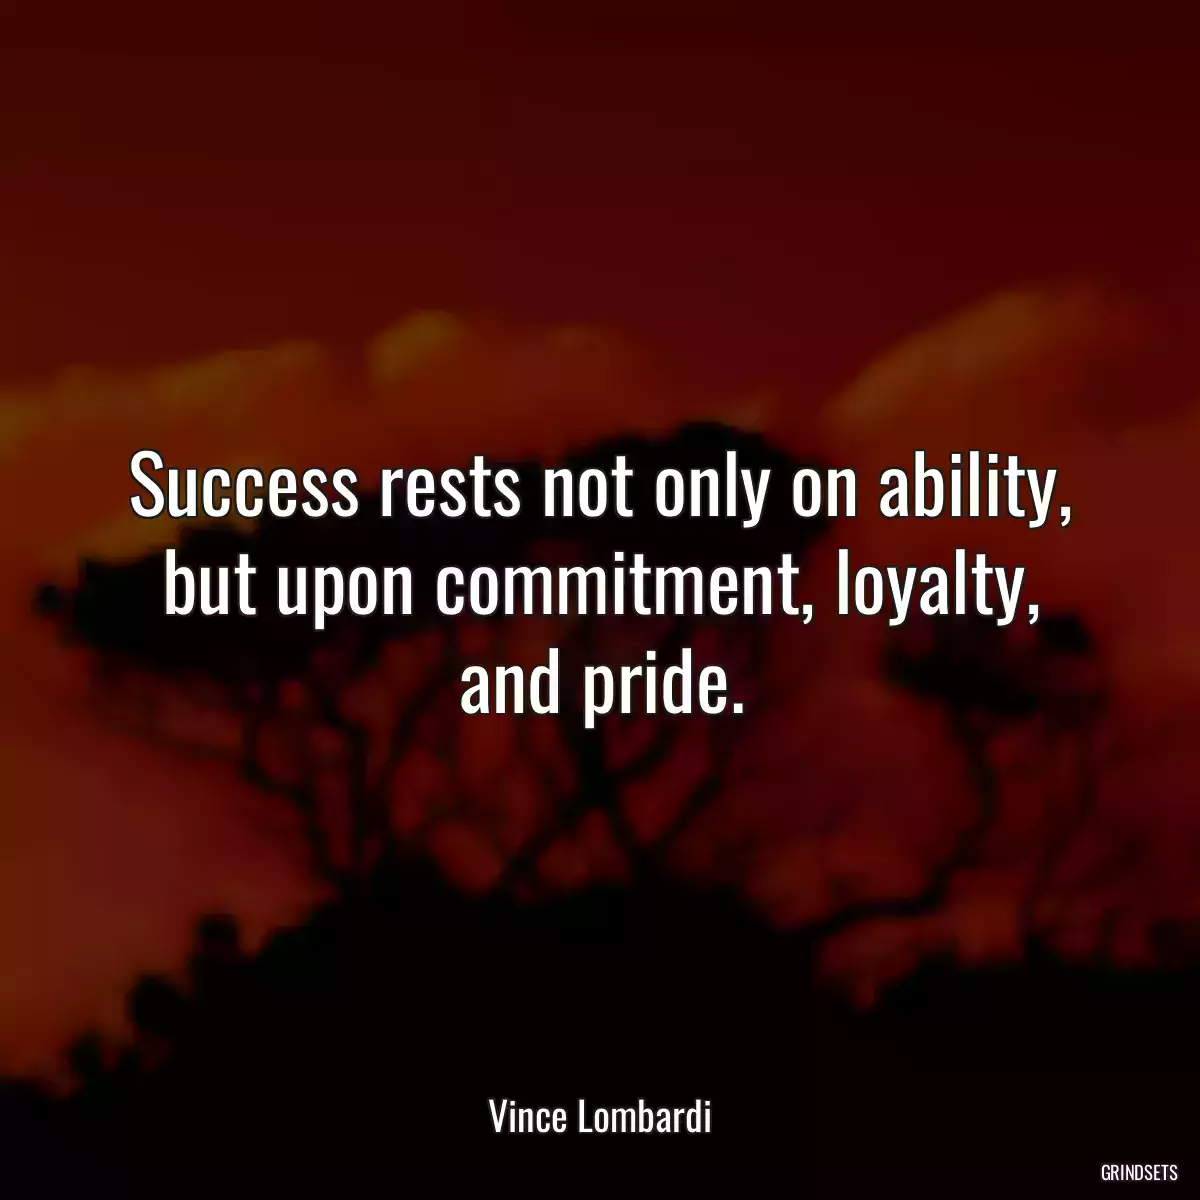 Success rests not only on ability, but upon commitment, loyalty, and pride.